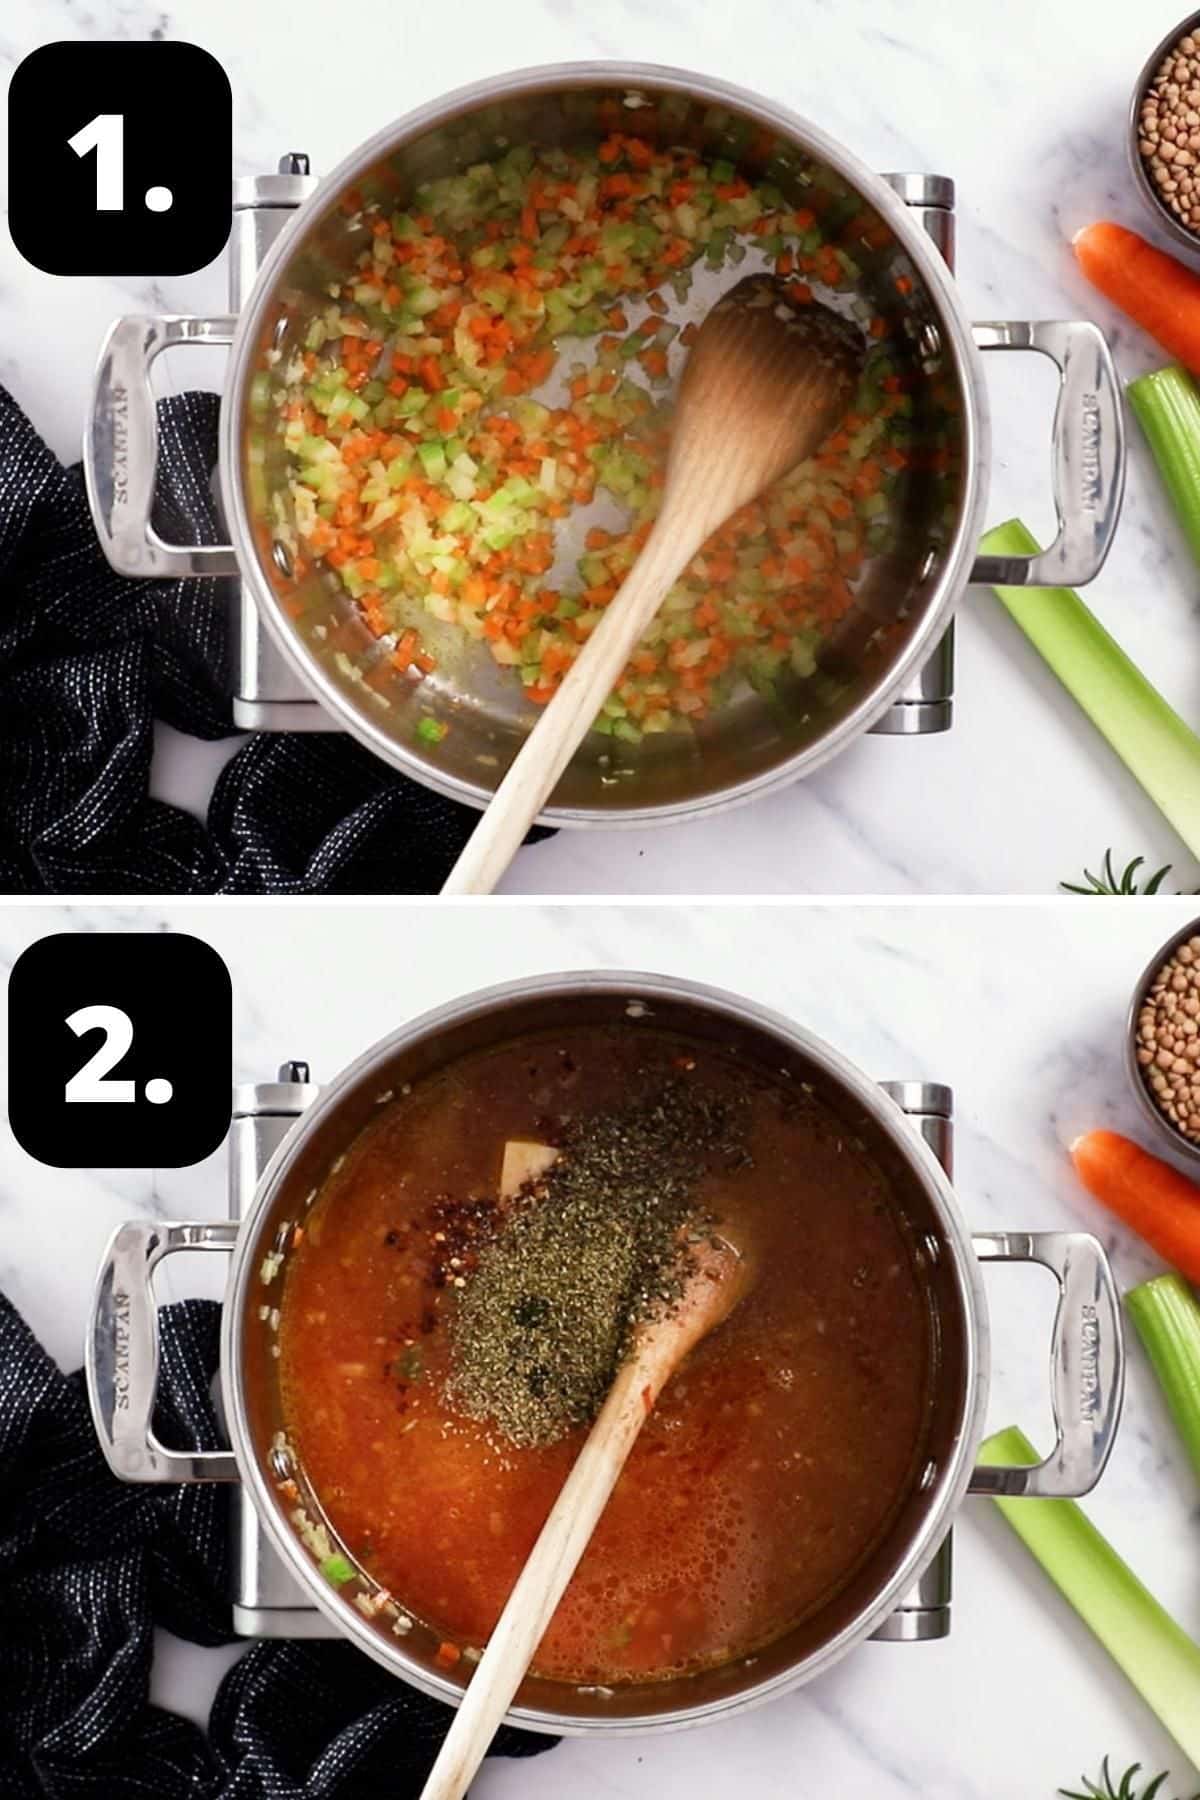 Steps 1-2 of preparing this recipe - sautéing the vegetables and adding the tomato and herbs to the saucepan.